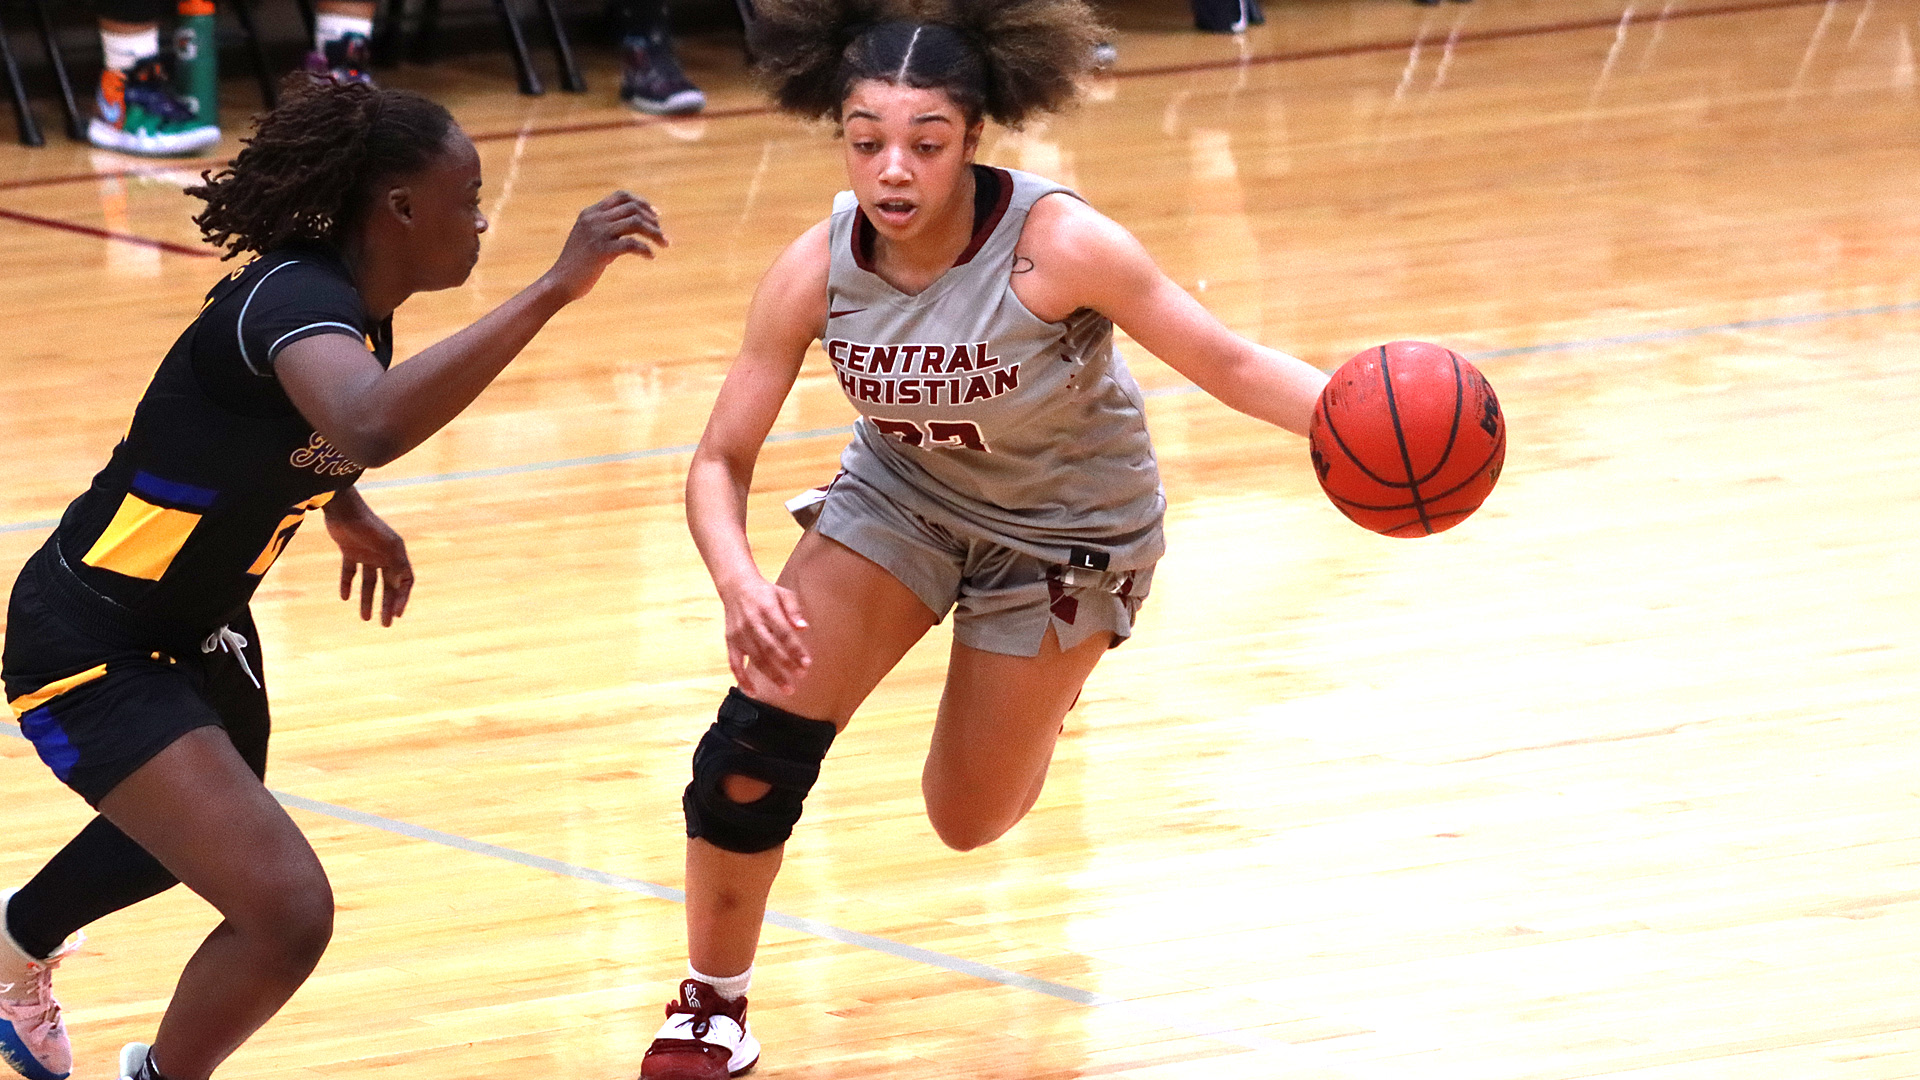 CCCB freshman Atira Davis scored 10 points and pulled down six rebounds during the Saints' 58-47 loss to Kansas Christian College on Thursday.